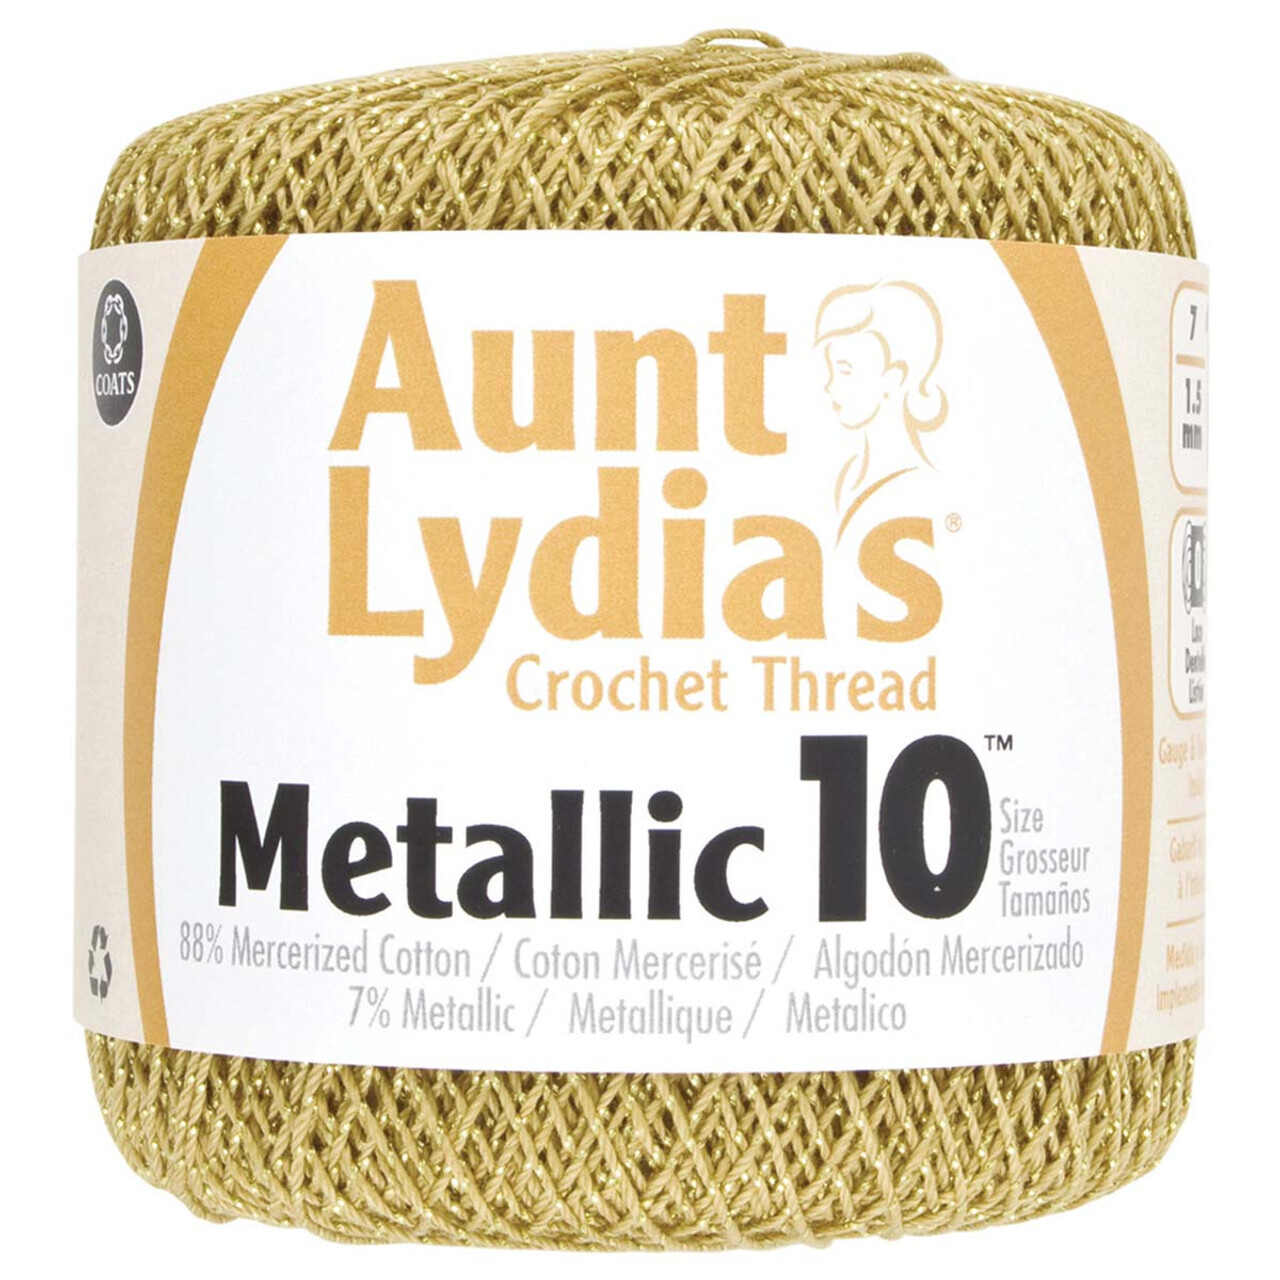 Knitting samples with Aunt Lydia's Classic 10 crochet thread